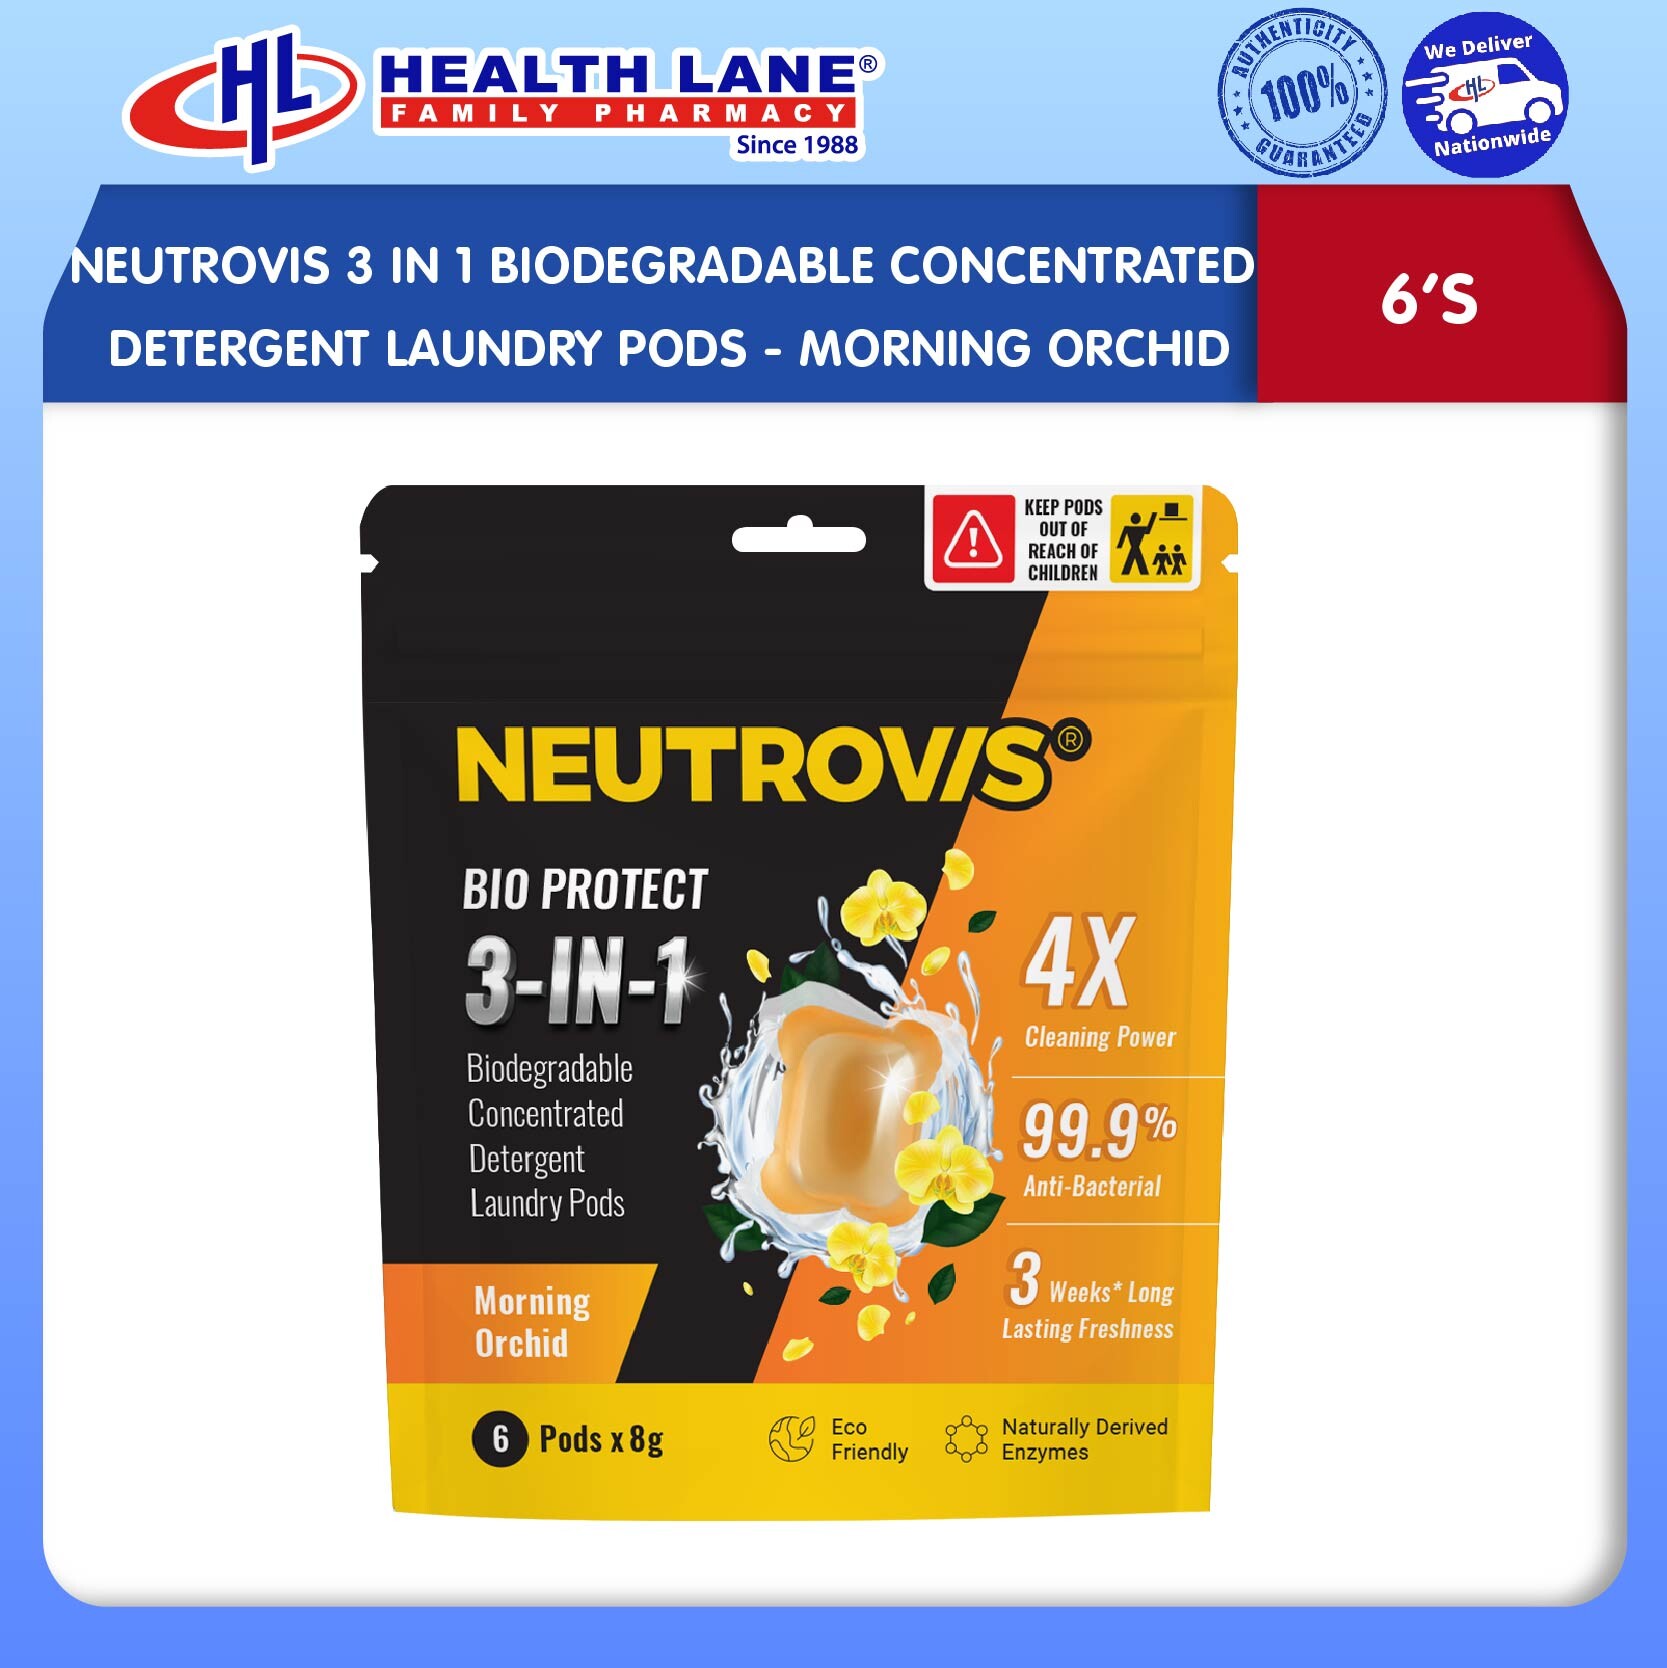 NEUTROVIS 3 IN 1 BIODEGRADABLE CONCENTRATED DETERGENT LAUNDRY PODS (6'S) - MORNING ORCHID